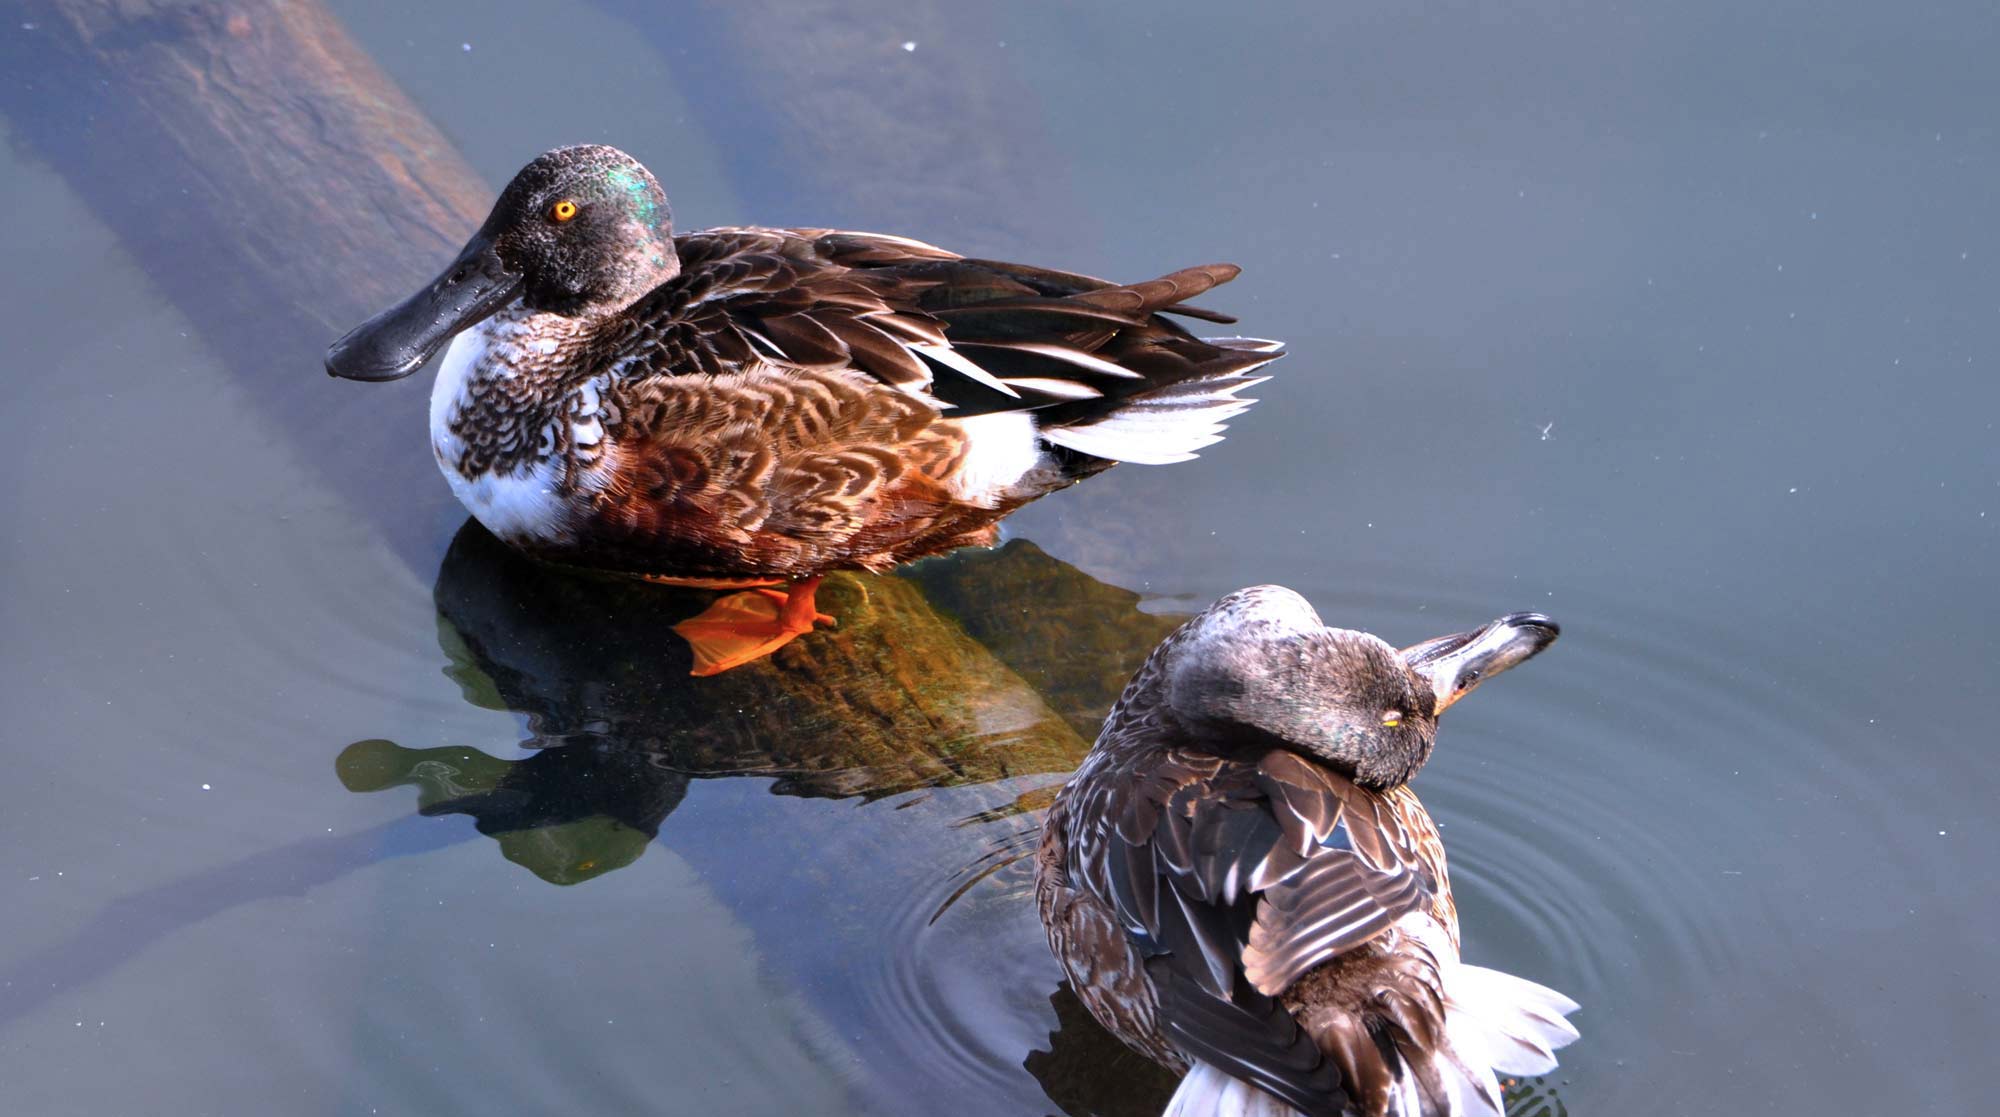 Northern shoveler ducks on a log in the water.